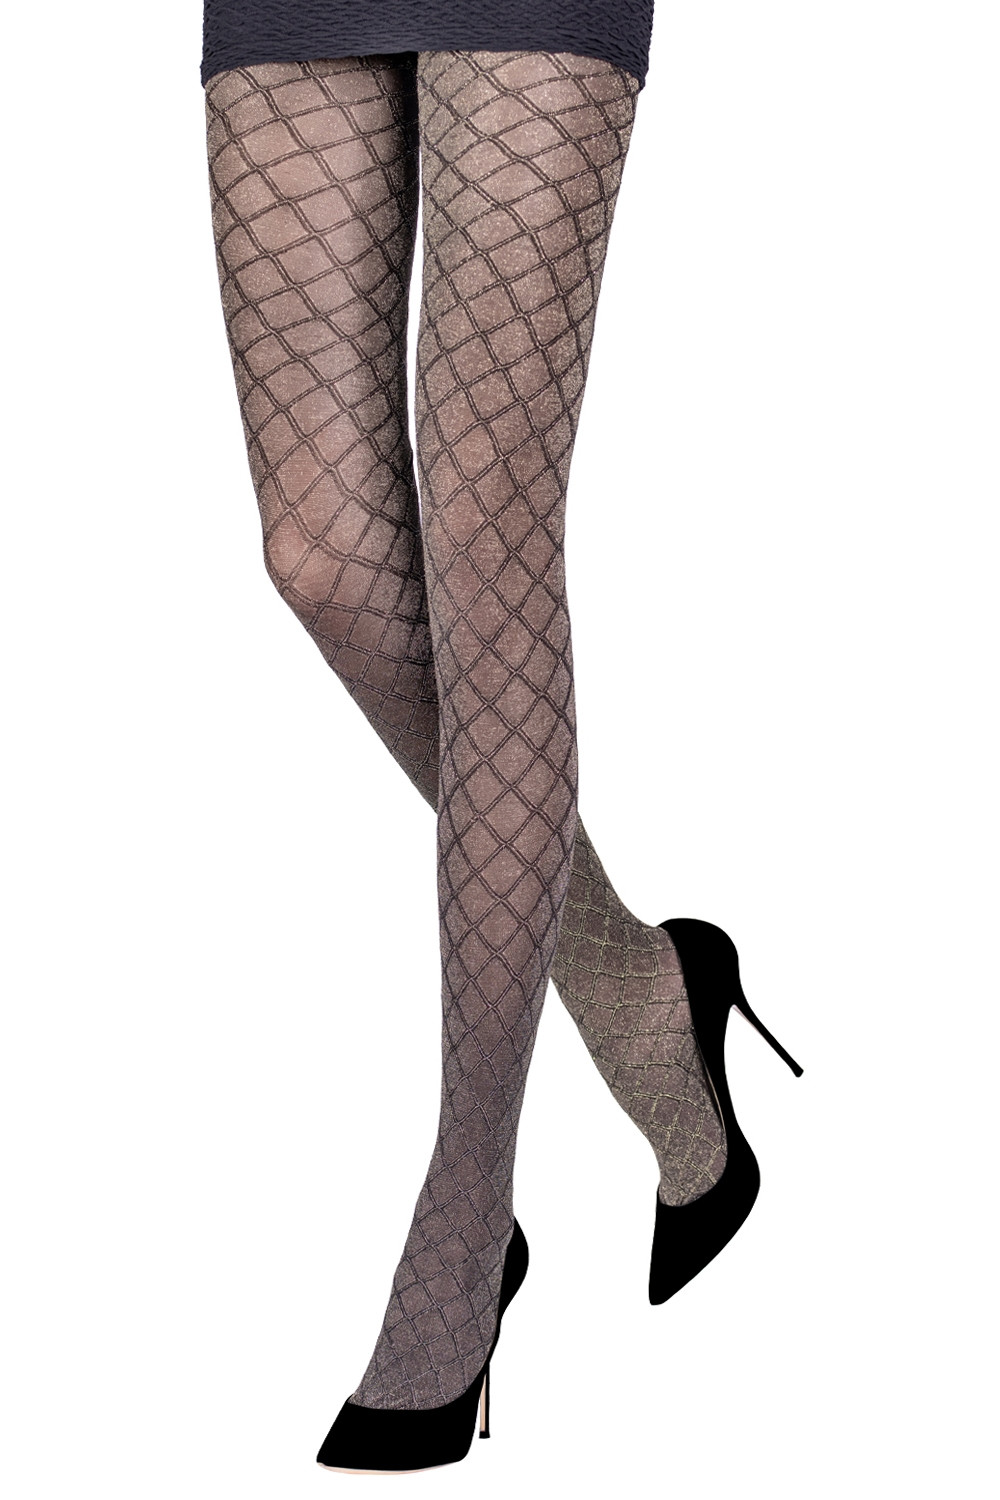 White tights bows holes front seam fishnet lace pantyhose de - Inspire  Uplift